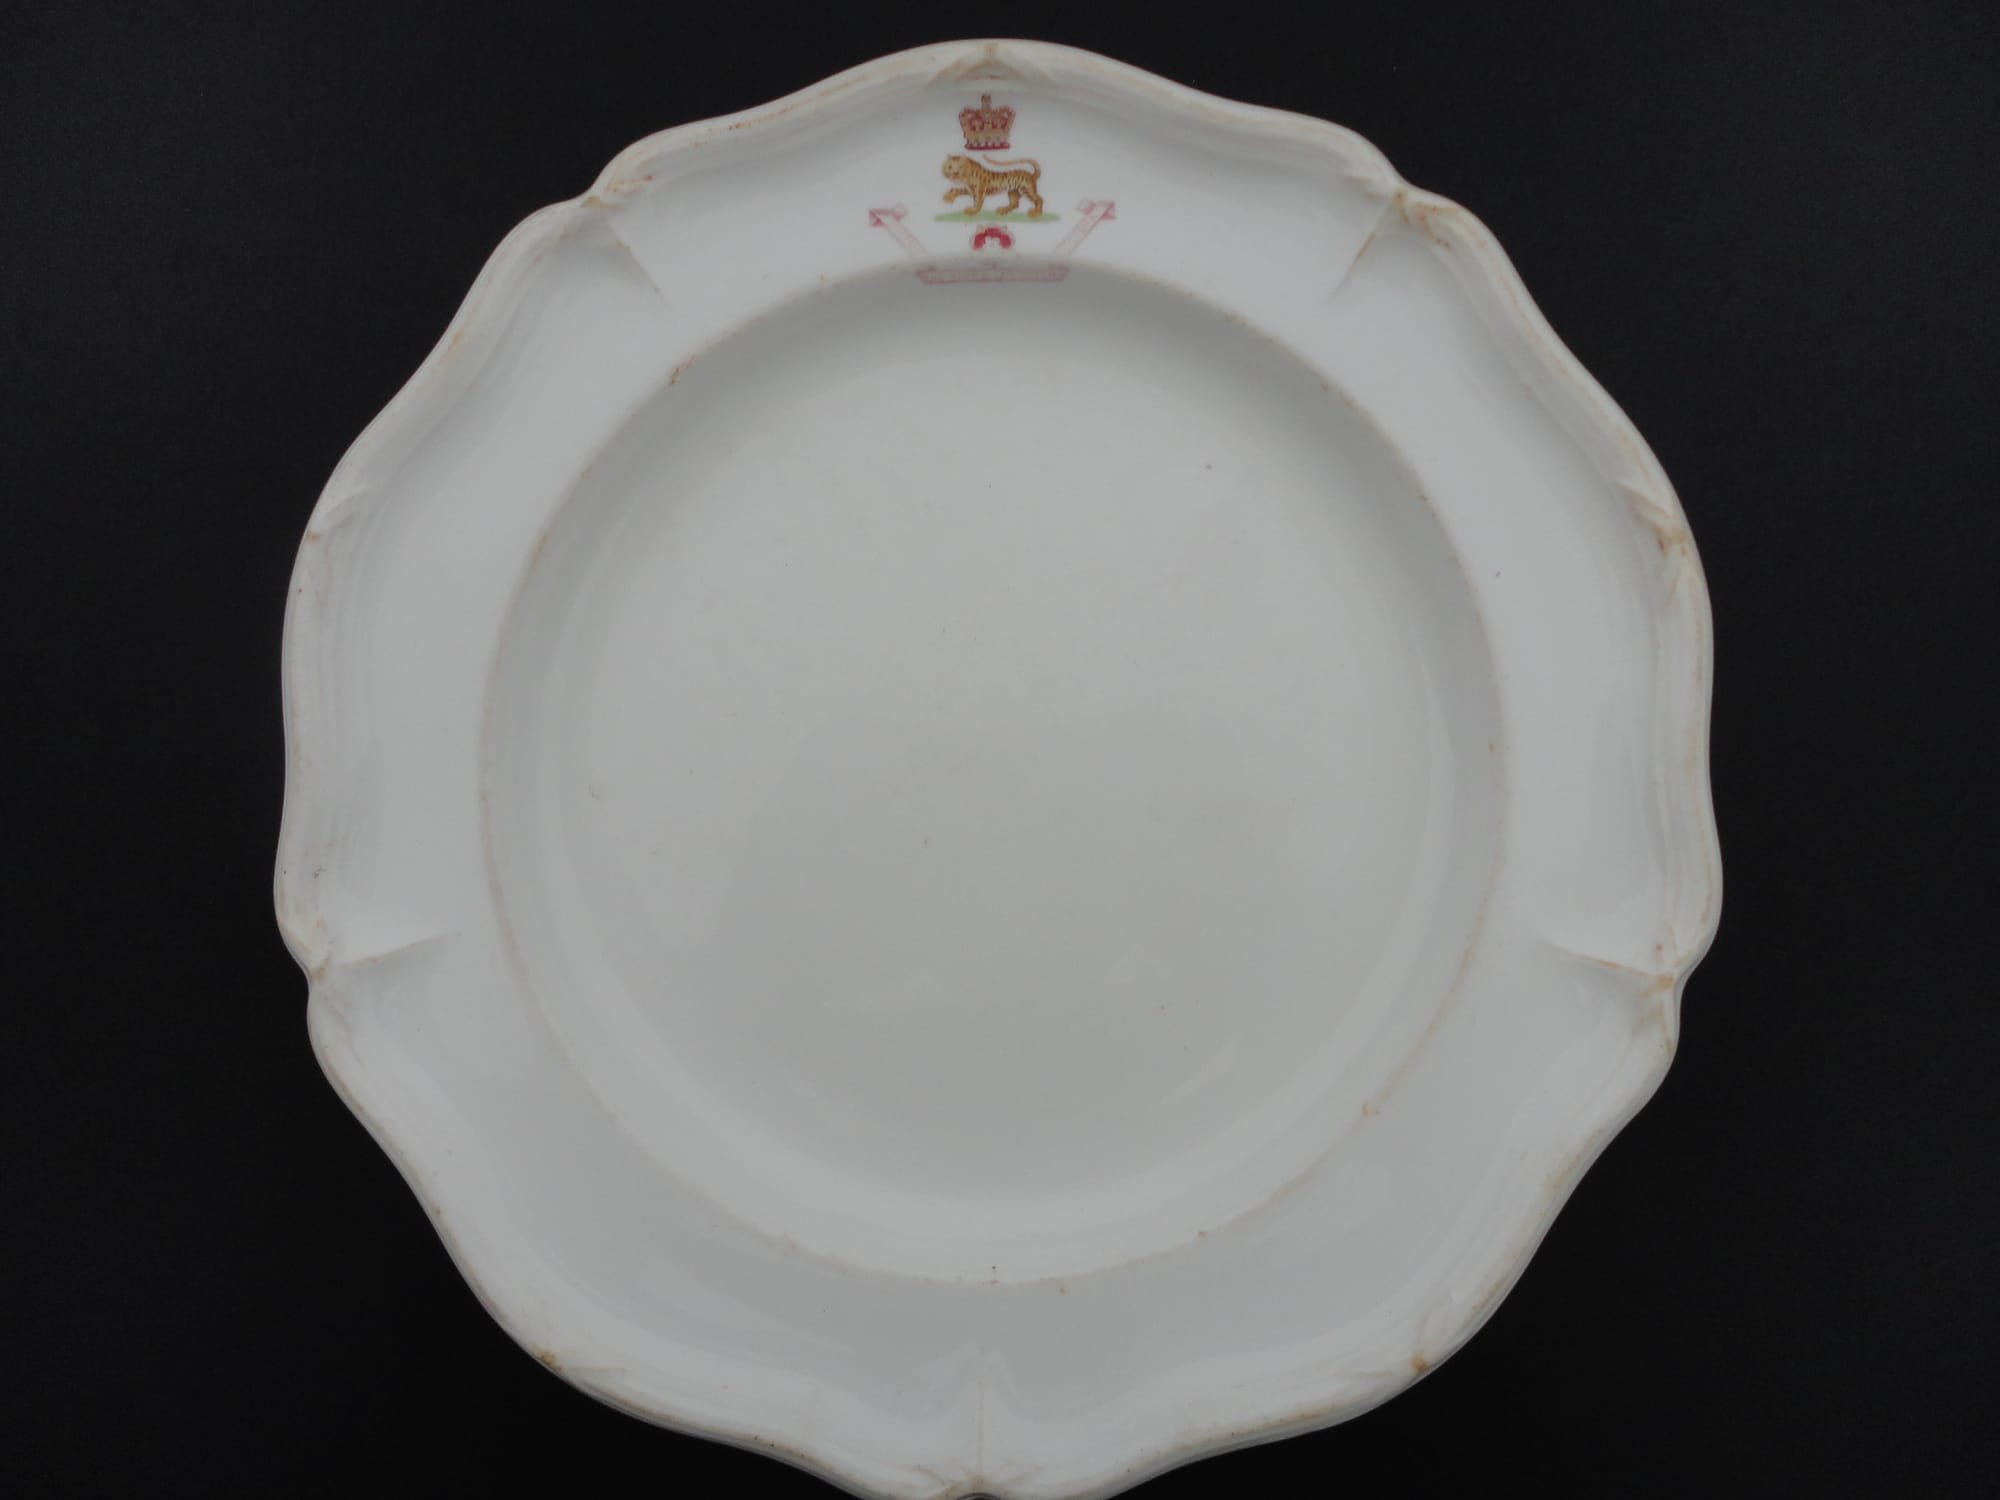 1st Battalion Officers Mess Plate Post 1952